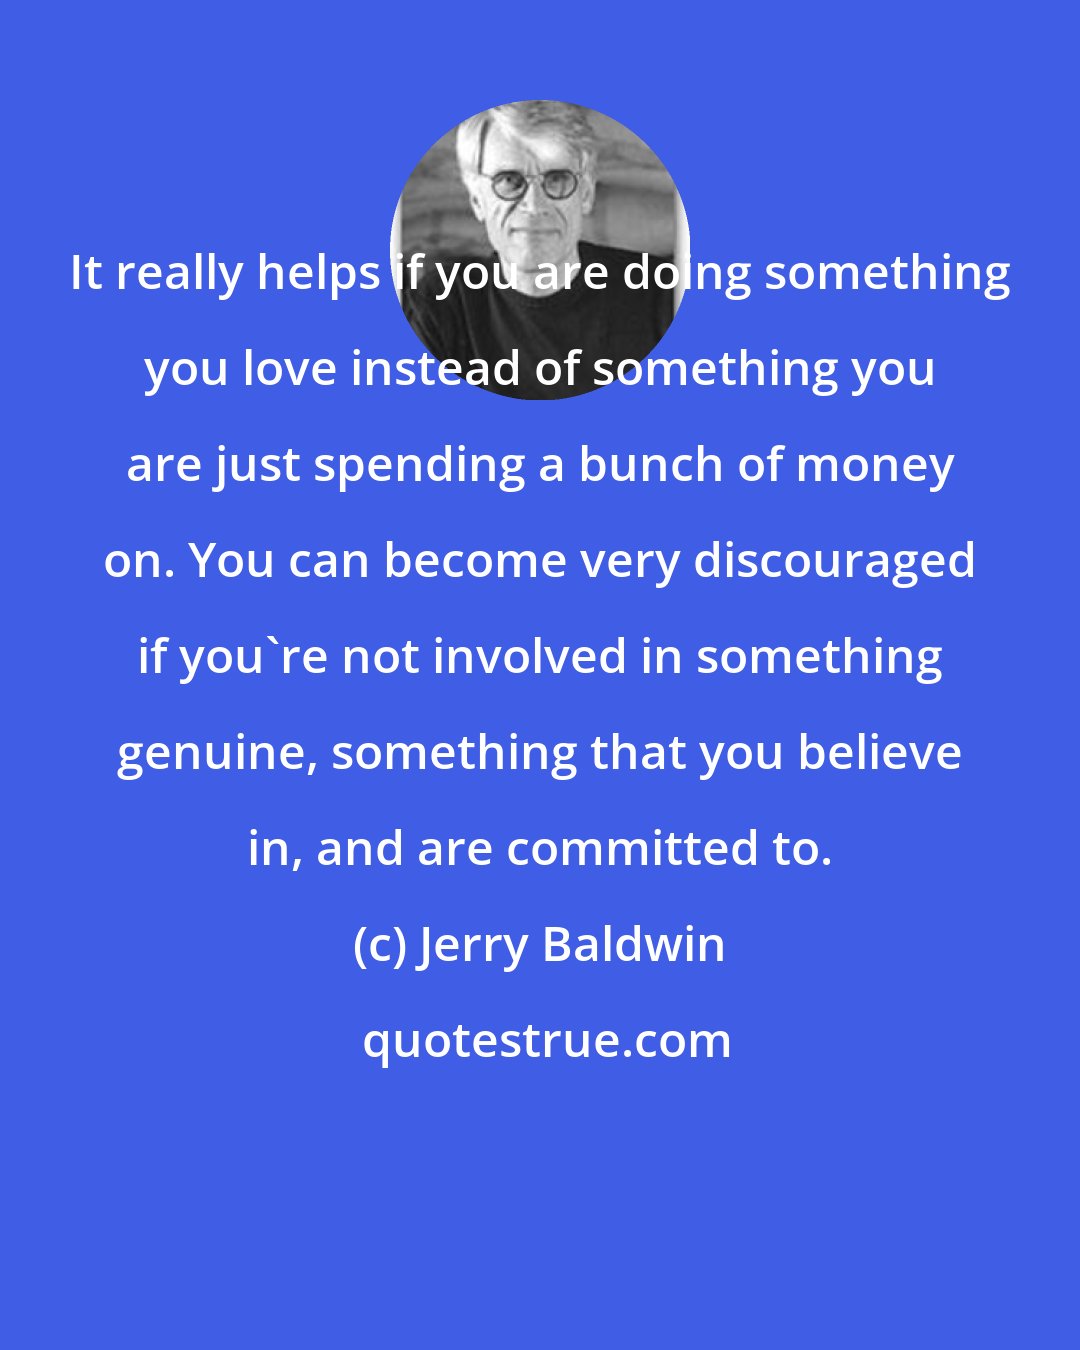 Jerry Baldwin: It really helps if you are doing something you love instead of something you are just spending a bunch of money on. You can become very discouraged if you're not involved in something genuine, something that you believe in, and are committed to.